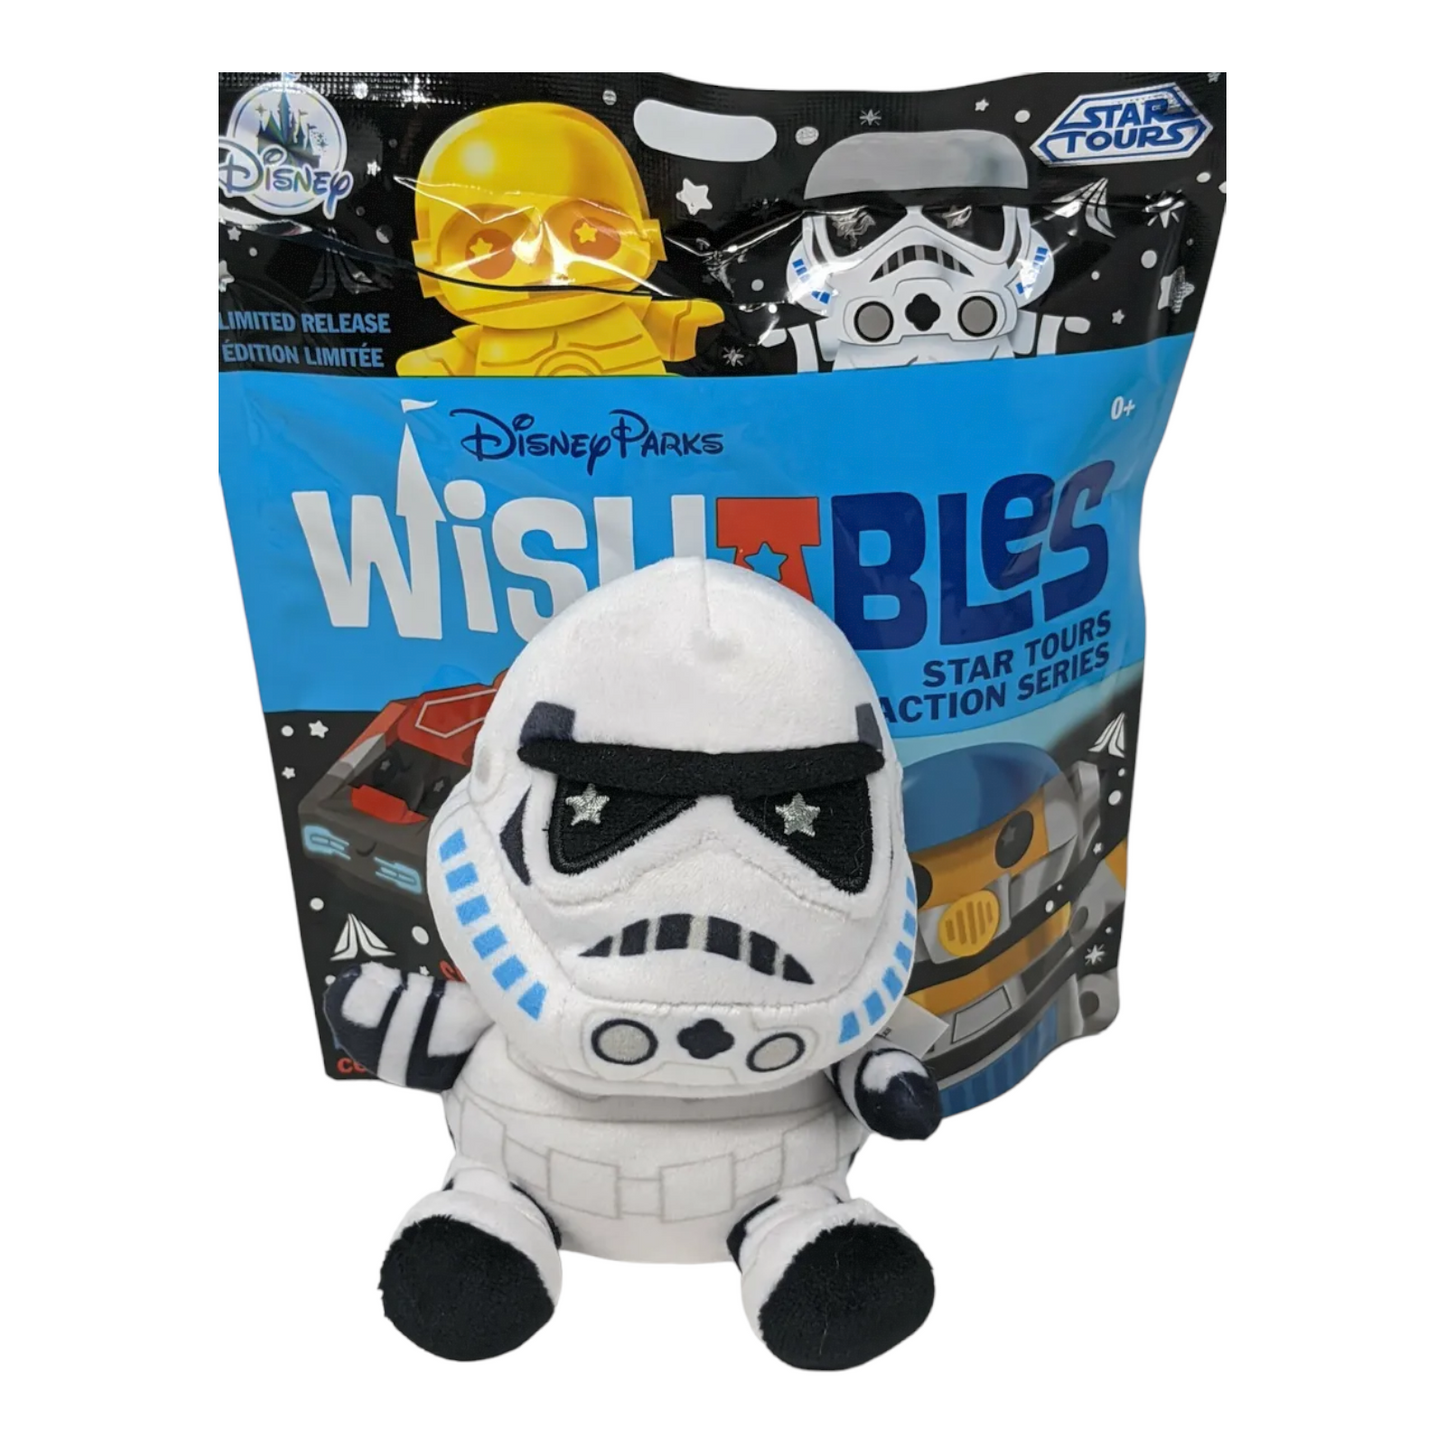 Disney Parks Wishables Mystery Plush -Star Tours Attraction Series - Limited Release